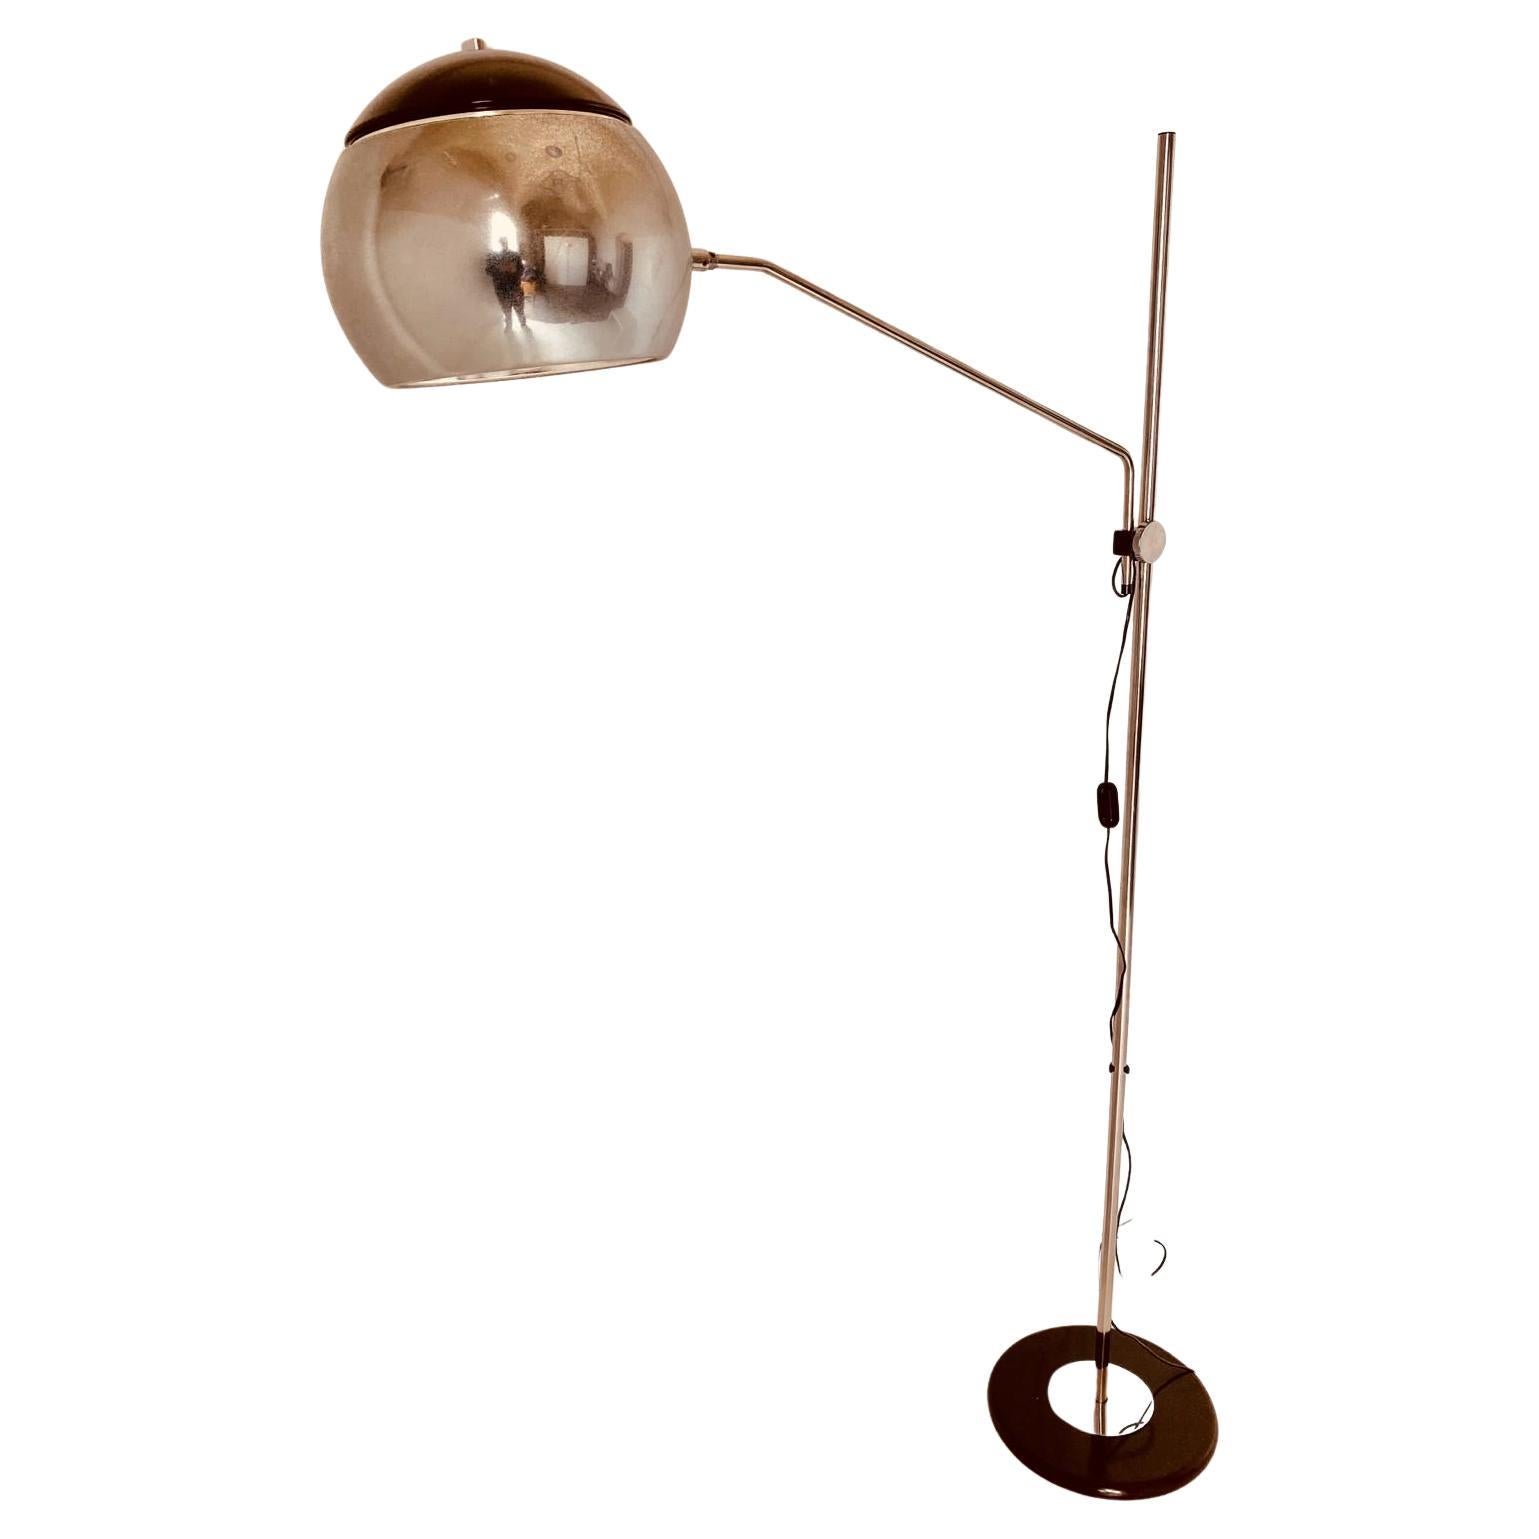 A 1960s vintage floor lamp made by a bakelite and chromed base with a chromed stick and an adjustable arm. Sheet metal light spot. In very good condtions with some sign of time.
Chromed has been polished and electrical parts revised.
Manufactured in